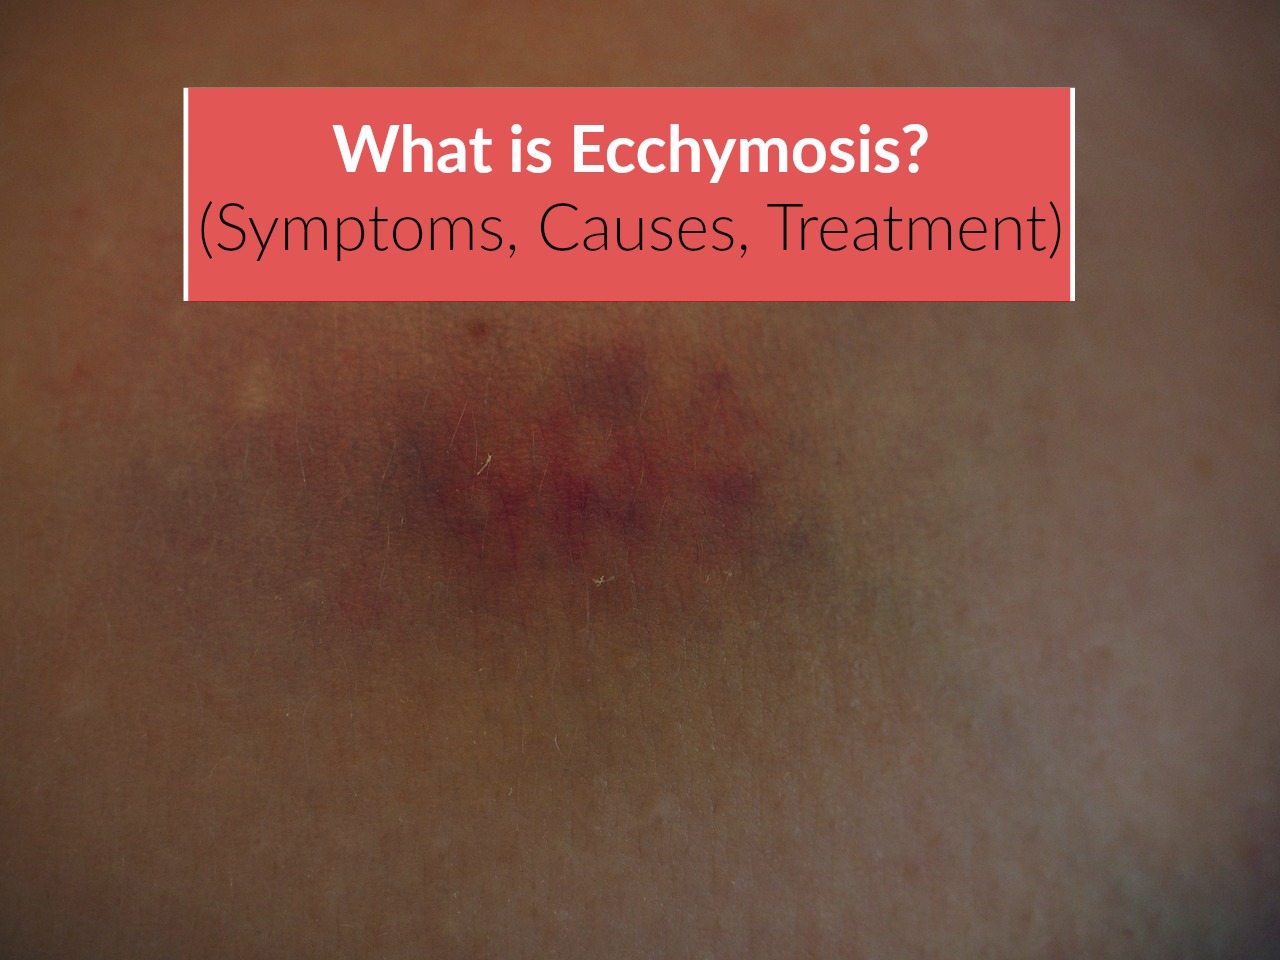 What is Ecchymosis